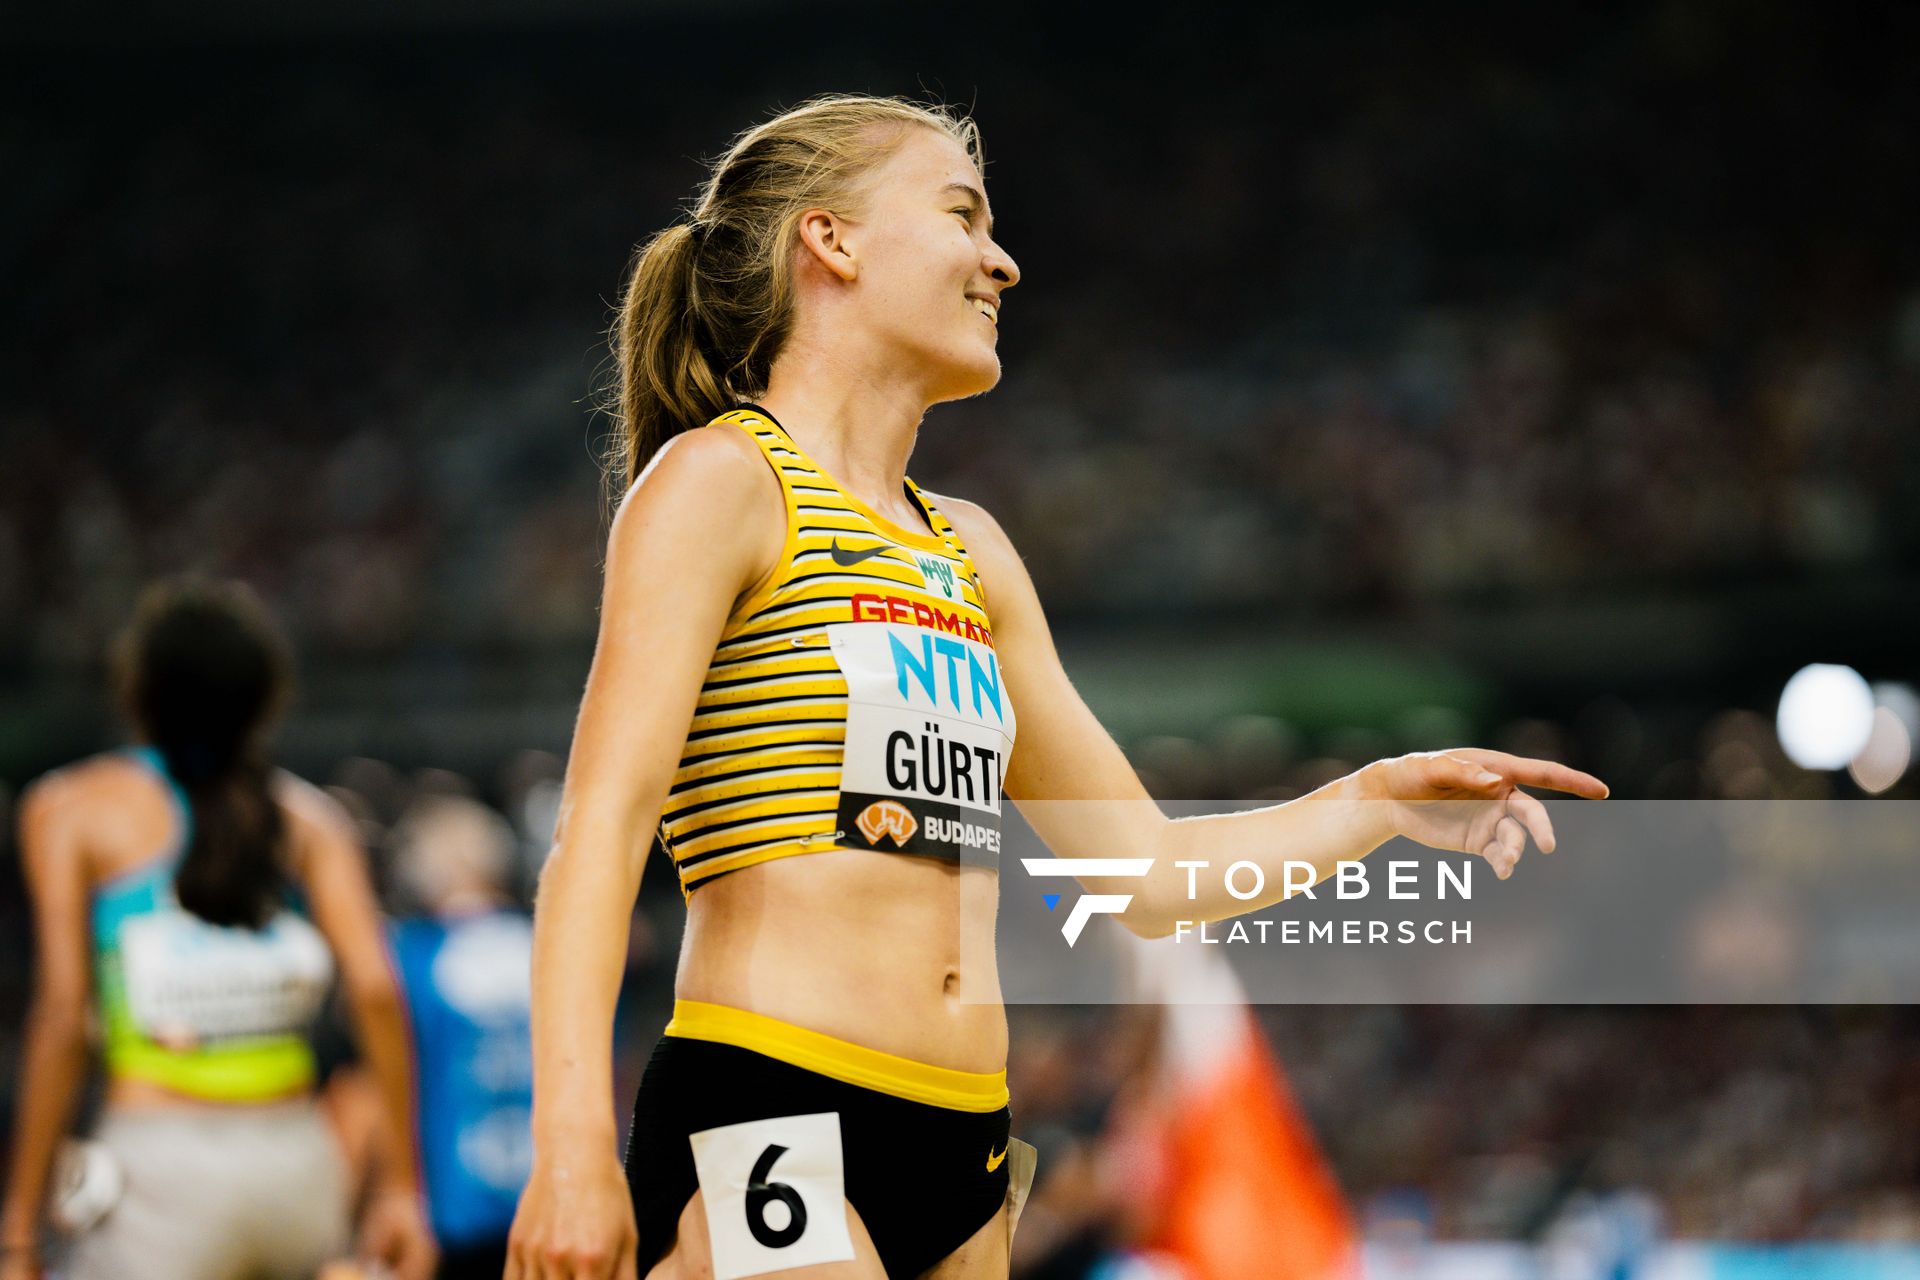 Olivia Gürth (GER/Germany) during the 3000 Metres Steeplechase on Day 9 of the World Athletics Championships Budapest 23 at the National Athletics Centre in Budapest, Hungary on August 27, 2023.